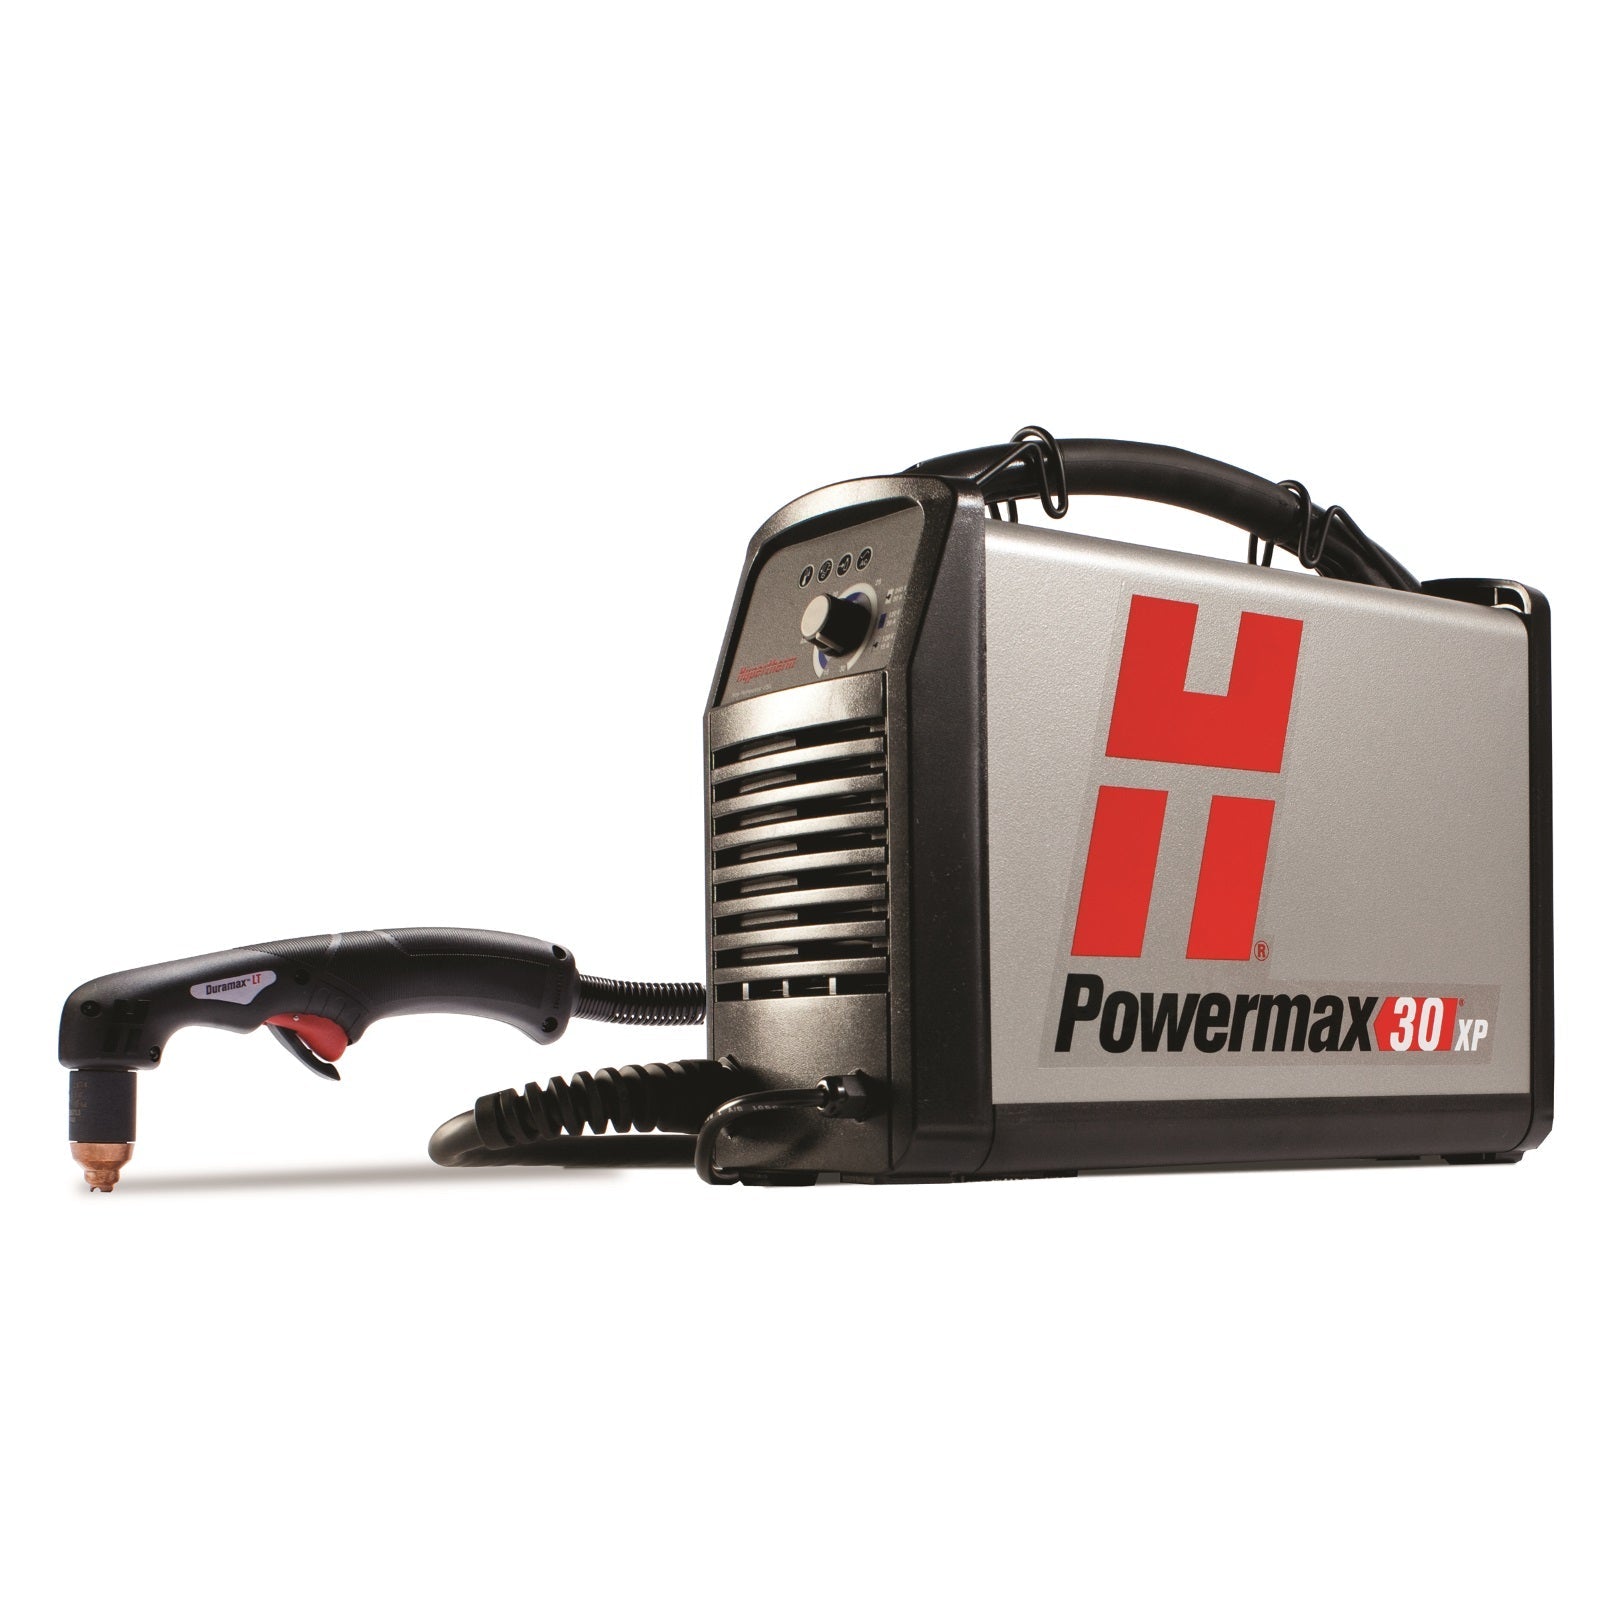 Hypertherm Powermax 30 XP with 15ft Torch and Consumables Pkg (088079)